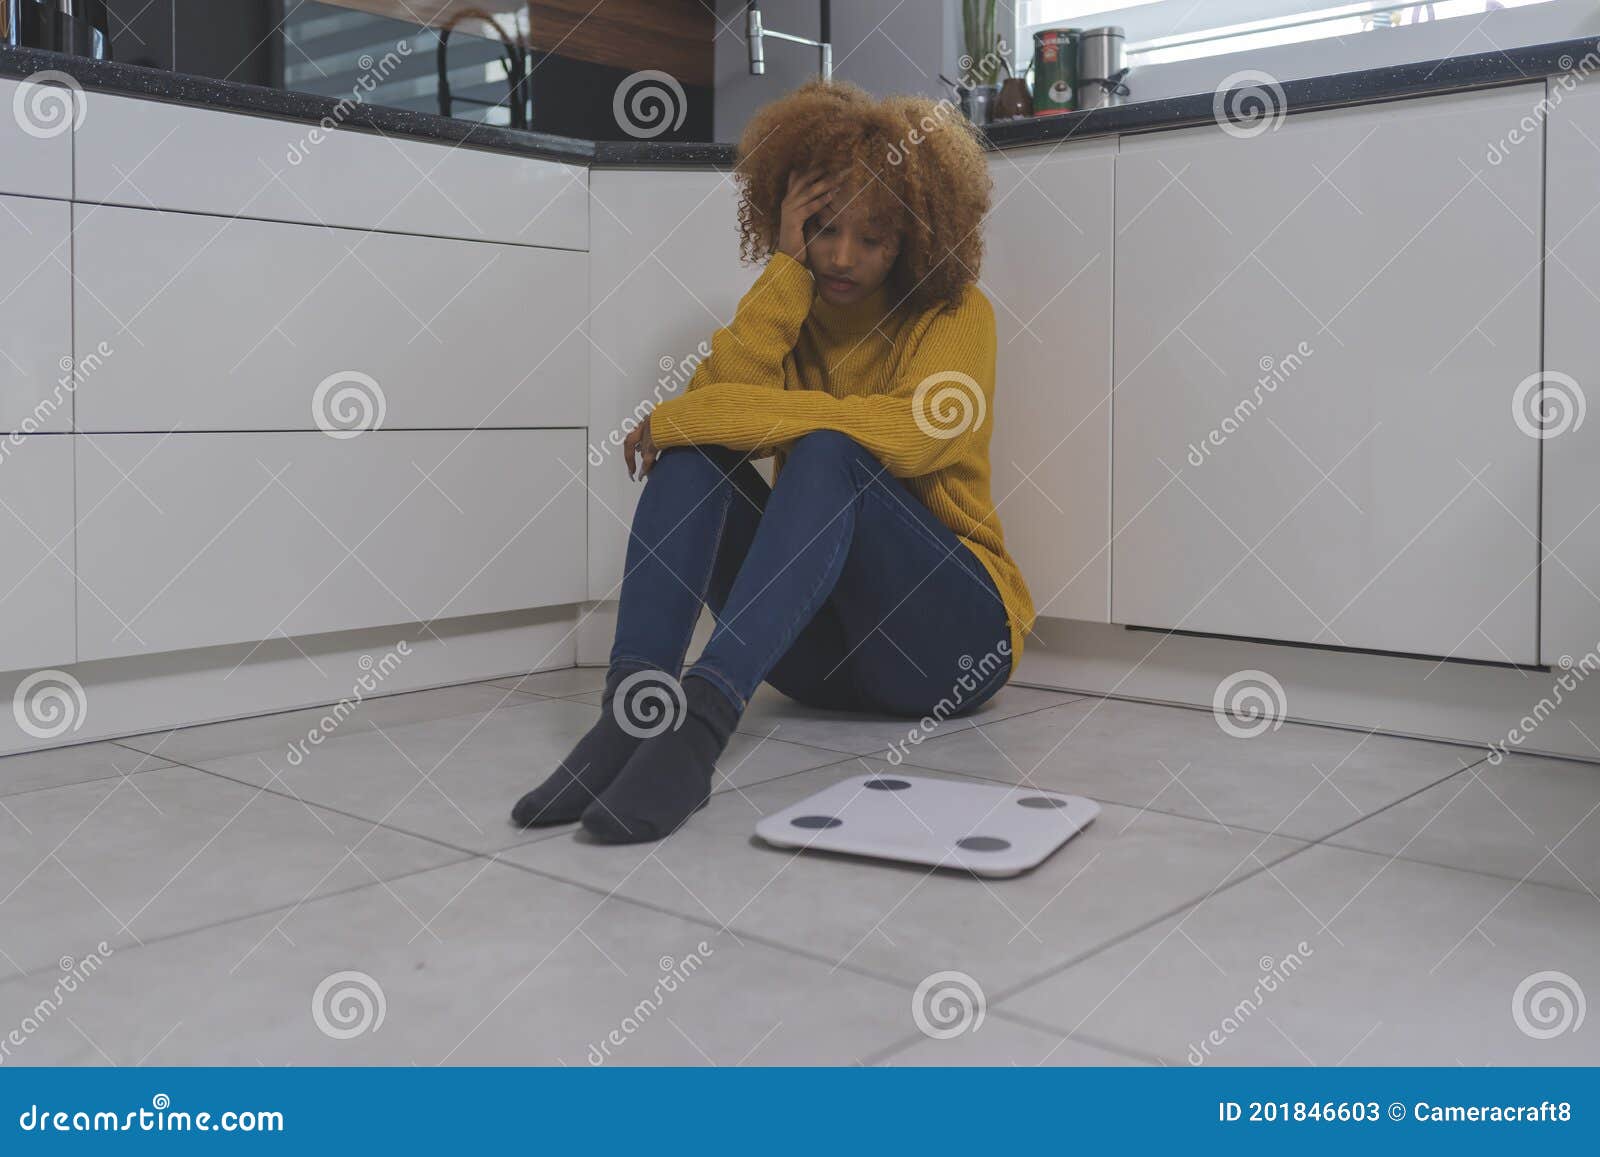 https://thumbs.dreamstime.com/z/devastated-young-african-american-black-woman-sitting-flor-weight-scale-front-weight-loss-mental-devastated-201846603.jpg